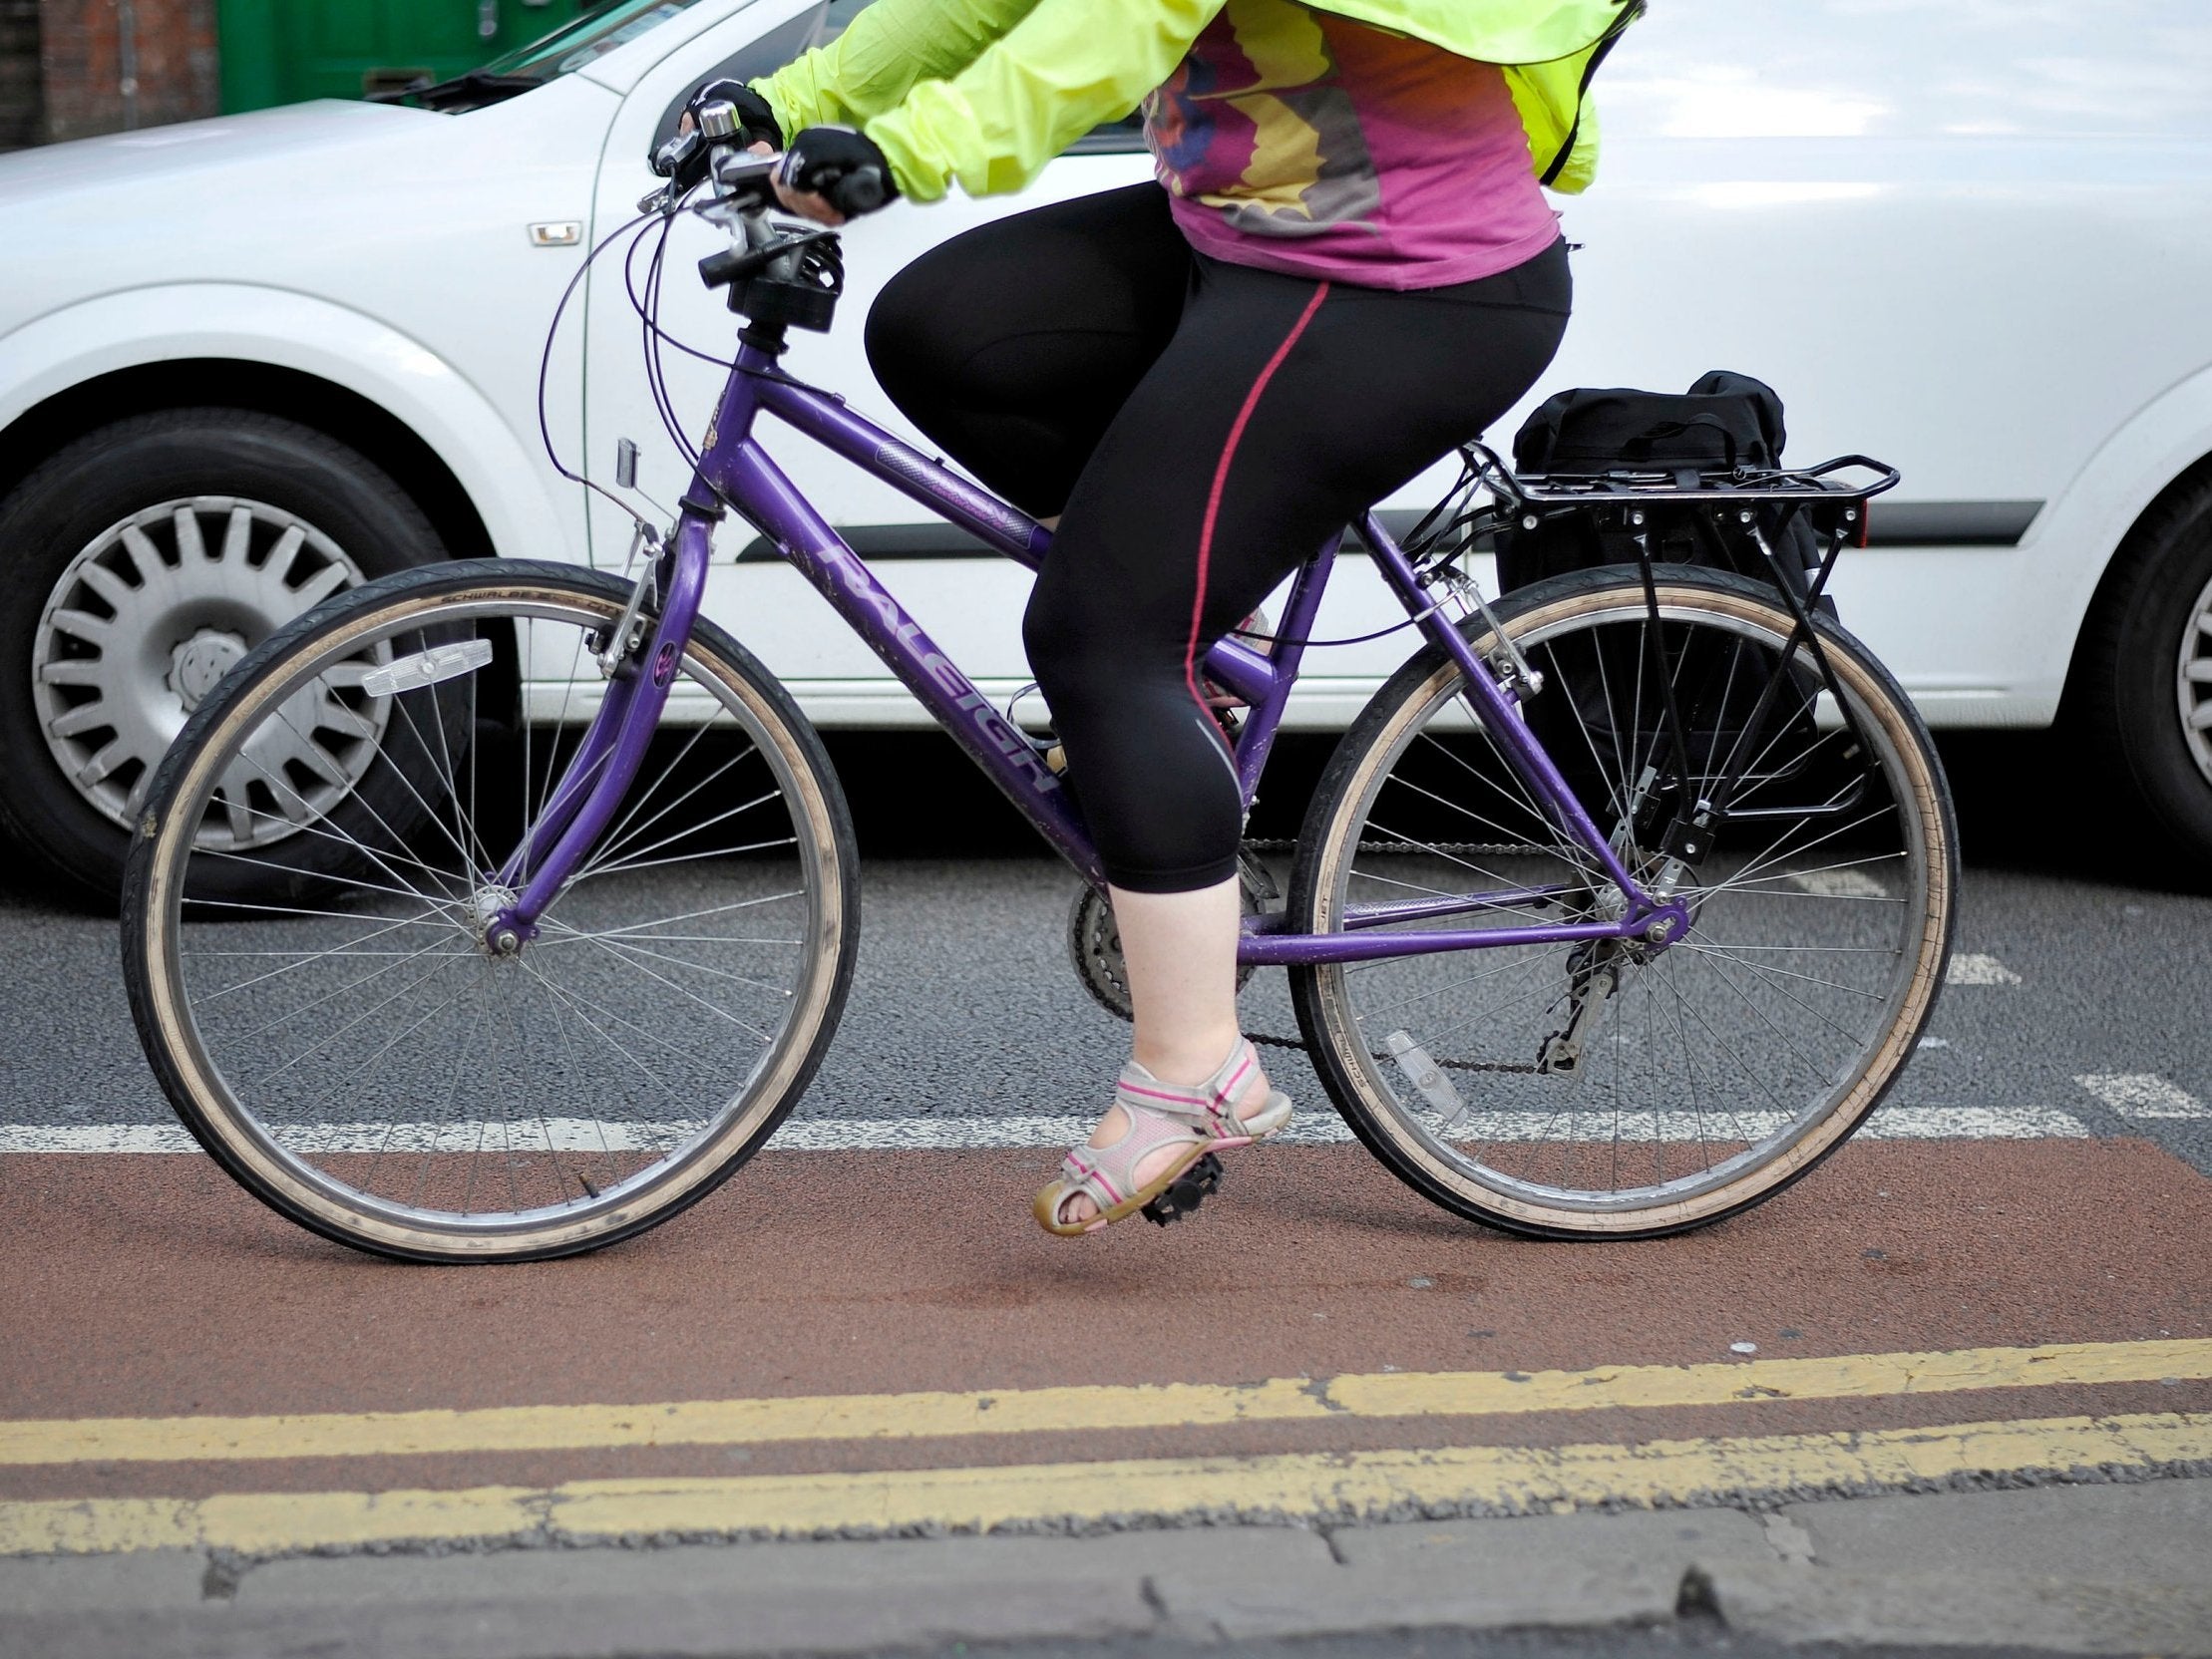 People who travel on two wheels are 63 times more likely to be killed or seriously injured (KSI) than car drivers, according to new research from road safety charity Brake